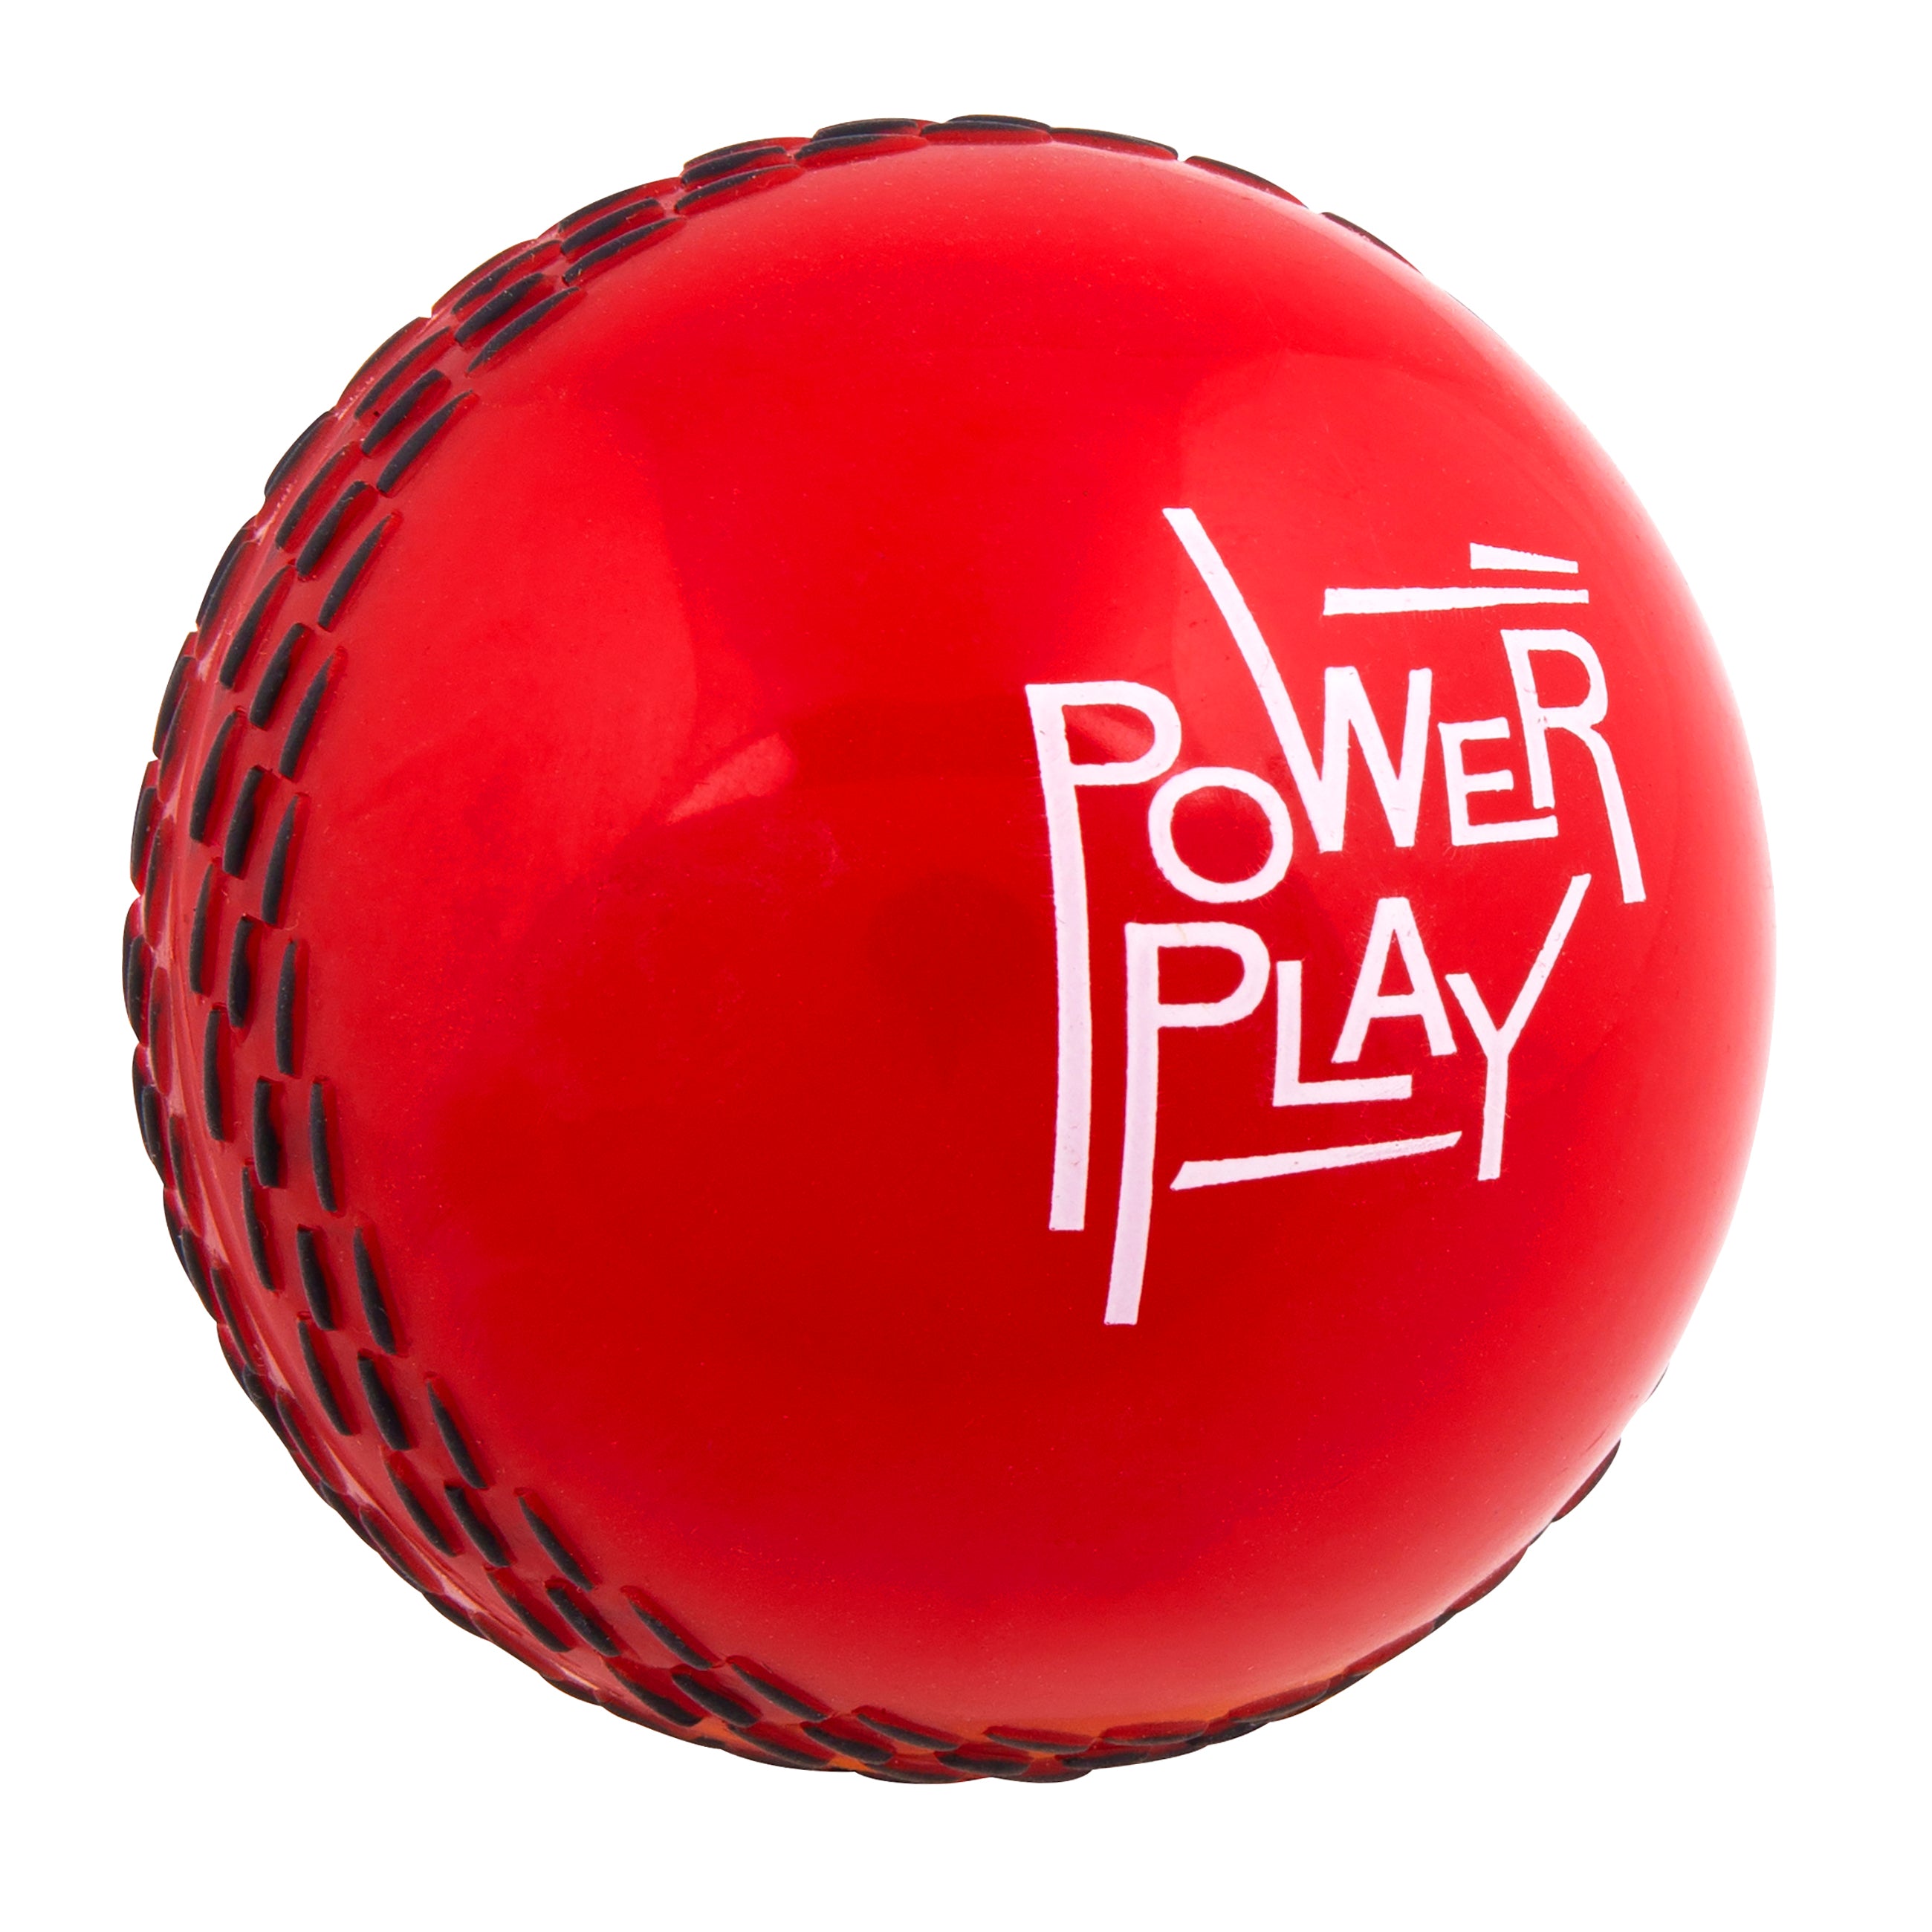 2600 CNBD20 5802556 Plastic Power Play Ball Red Front